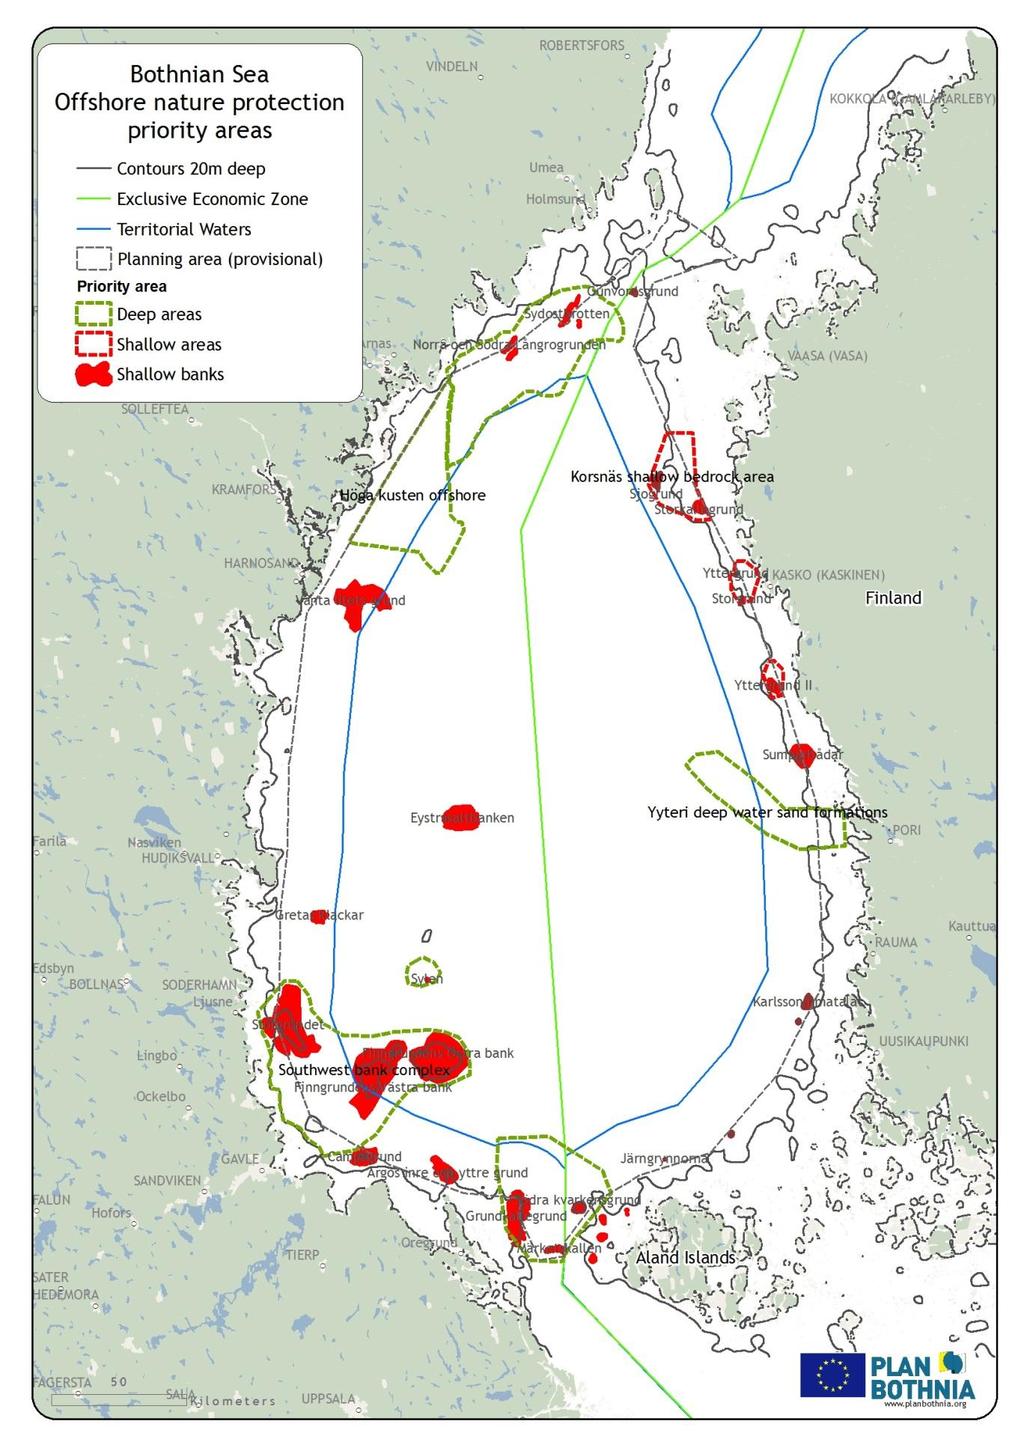 Map 10: An attempt to define ecologically special areas in the Bothnian Sea offshore based on depth, seabed complexity, surface